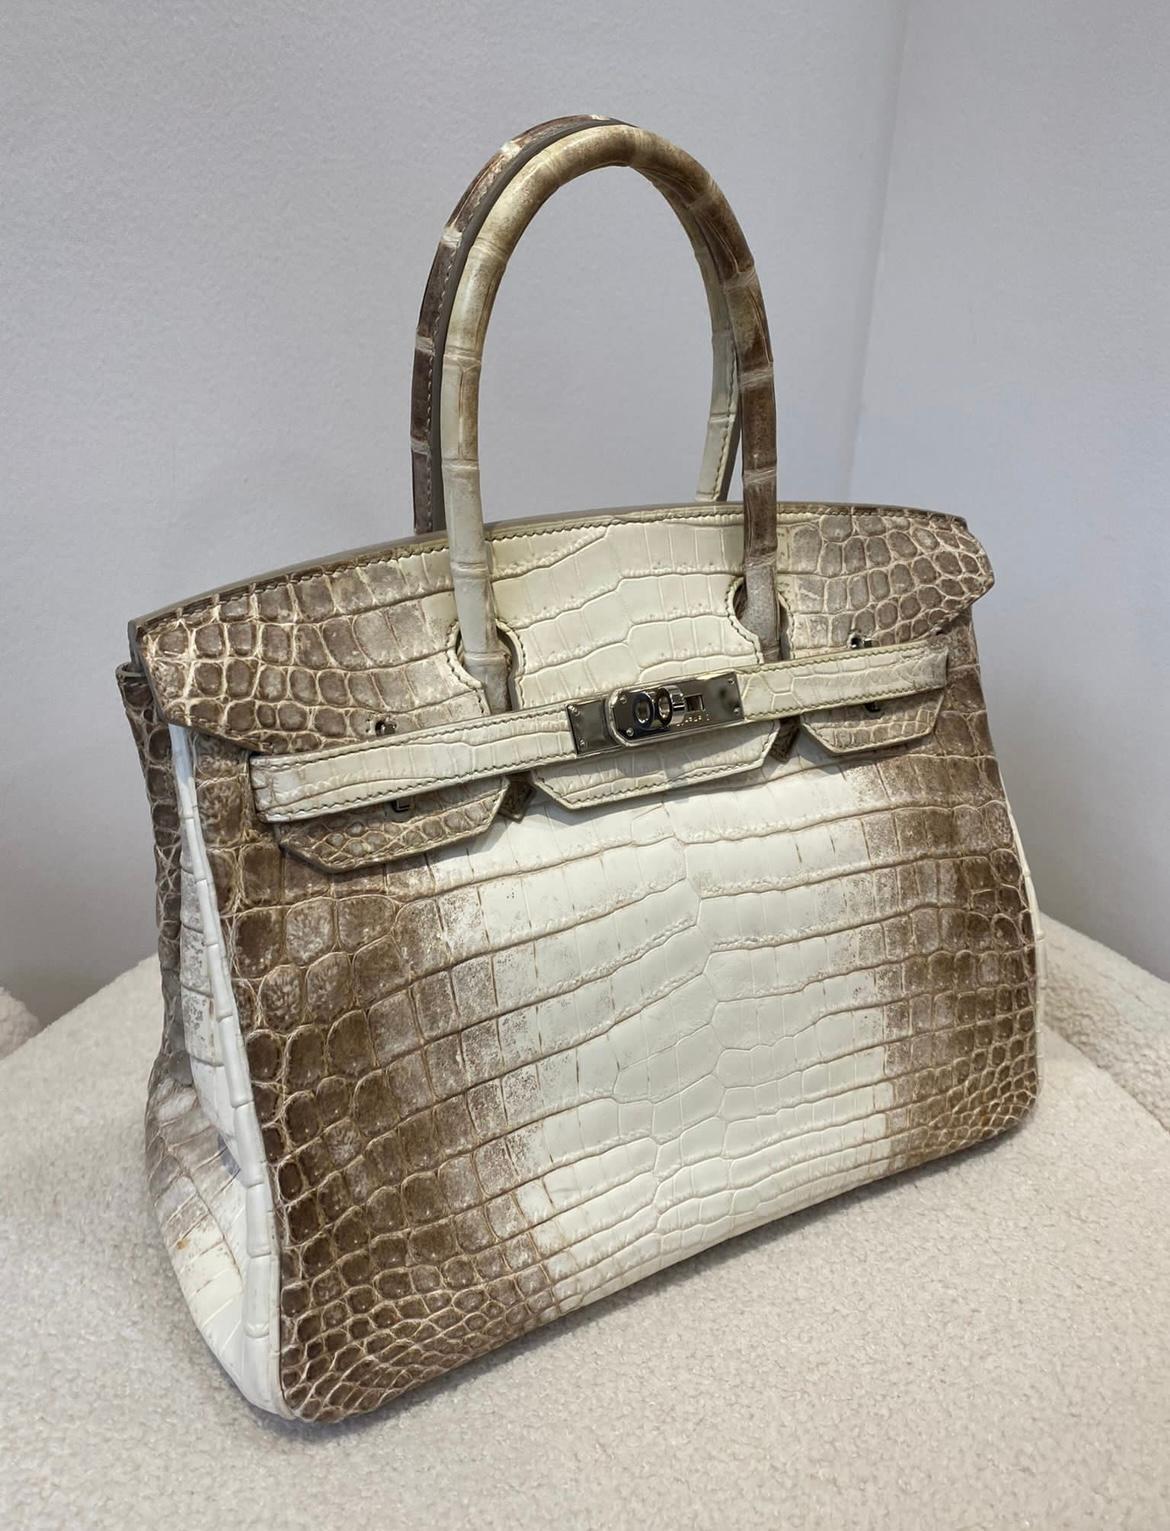 Hermes Birkin 30 Himalaya phw. Comes with box, dustbag, felt protection, rain cover, lock and keys
One of the rarest and most prestigious handbags ever created, the Hermès Birkin 30 Niloticus Himalaya Blanc is the holy grail of every collection.